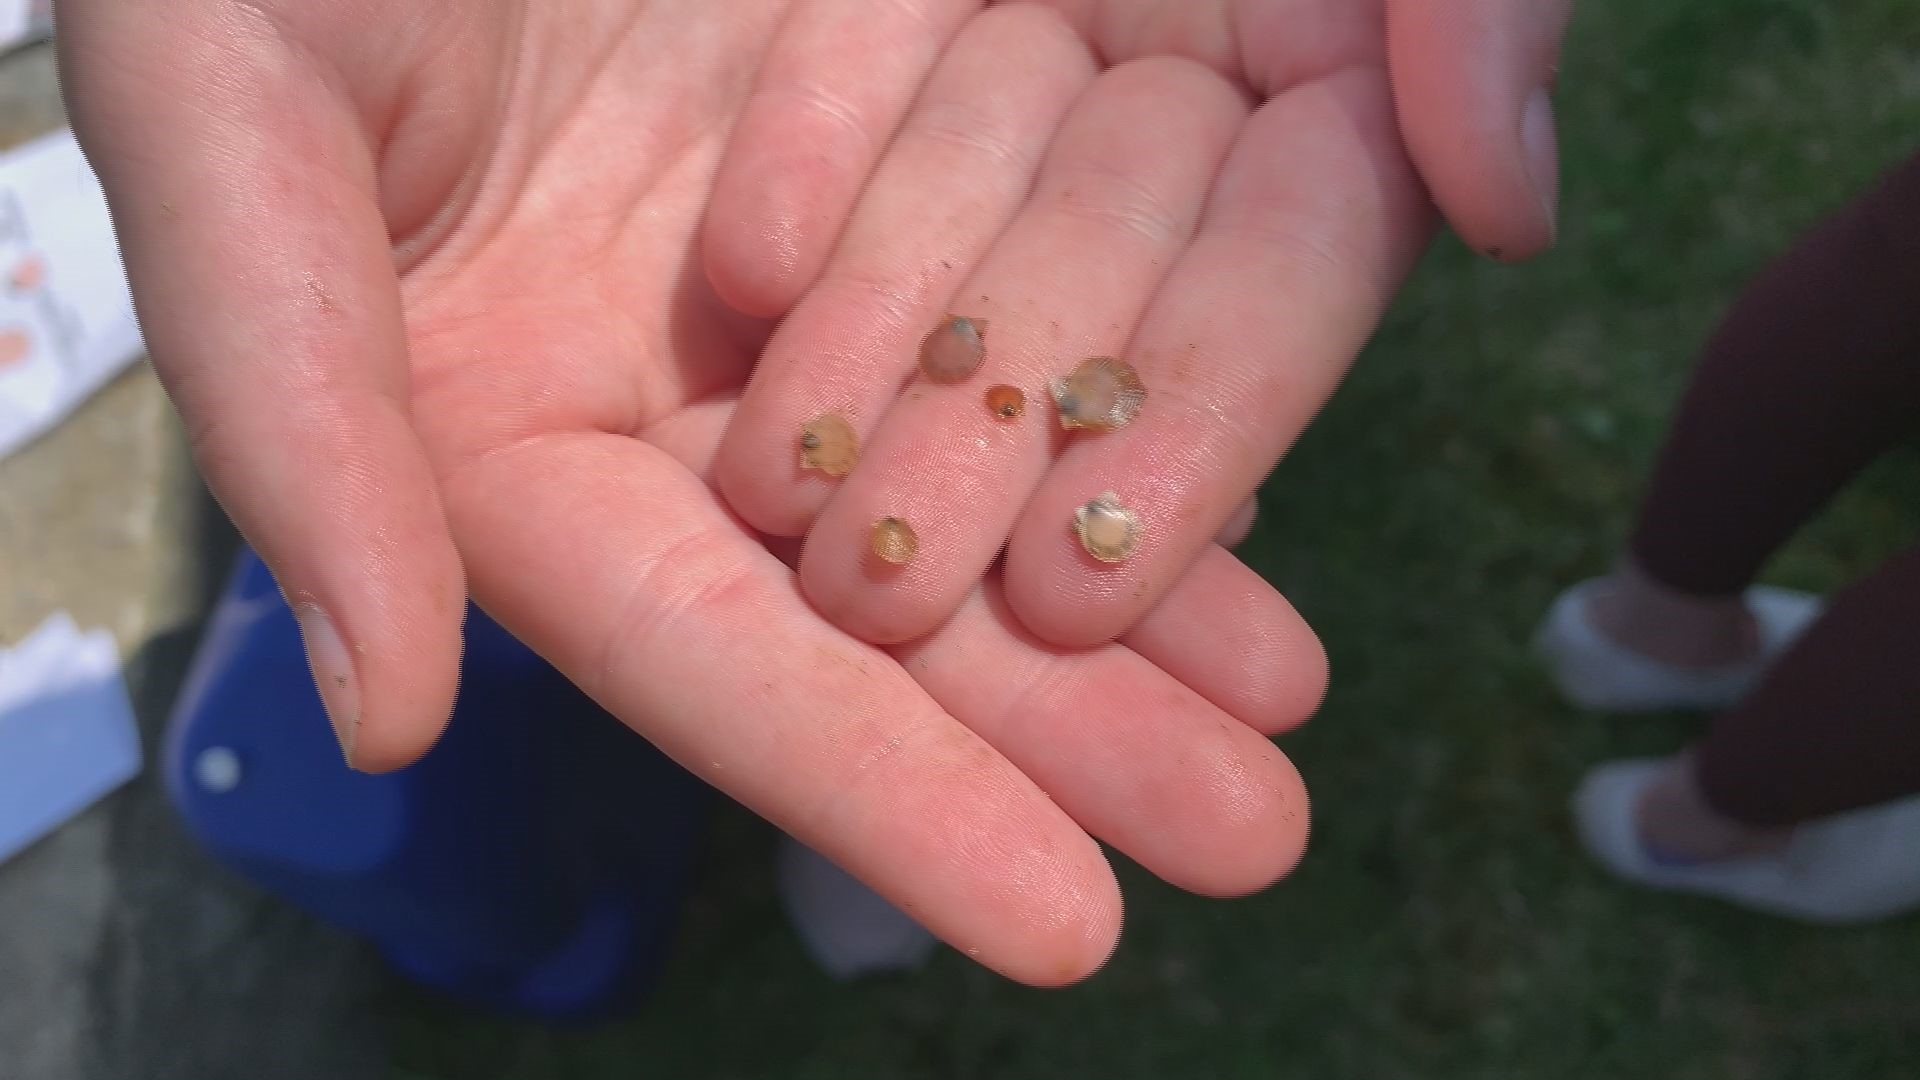 Hurricane Island Center for Science and Leadership in Rockland makes the water an outdoor classroom for students to learn the science of the scallop fishery.